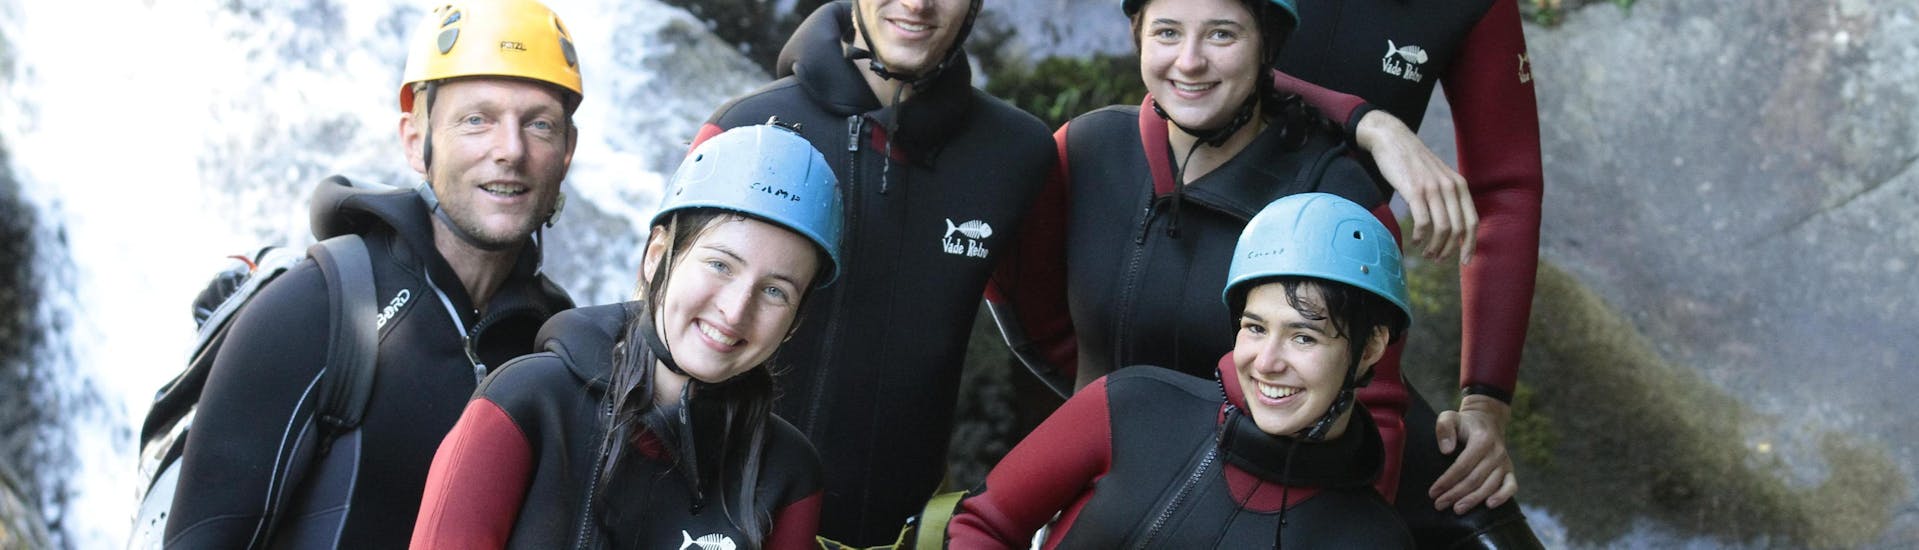 Canyoning im Haute Borne Canyon in der Ardèche - Tagestour.